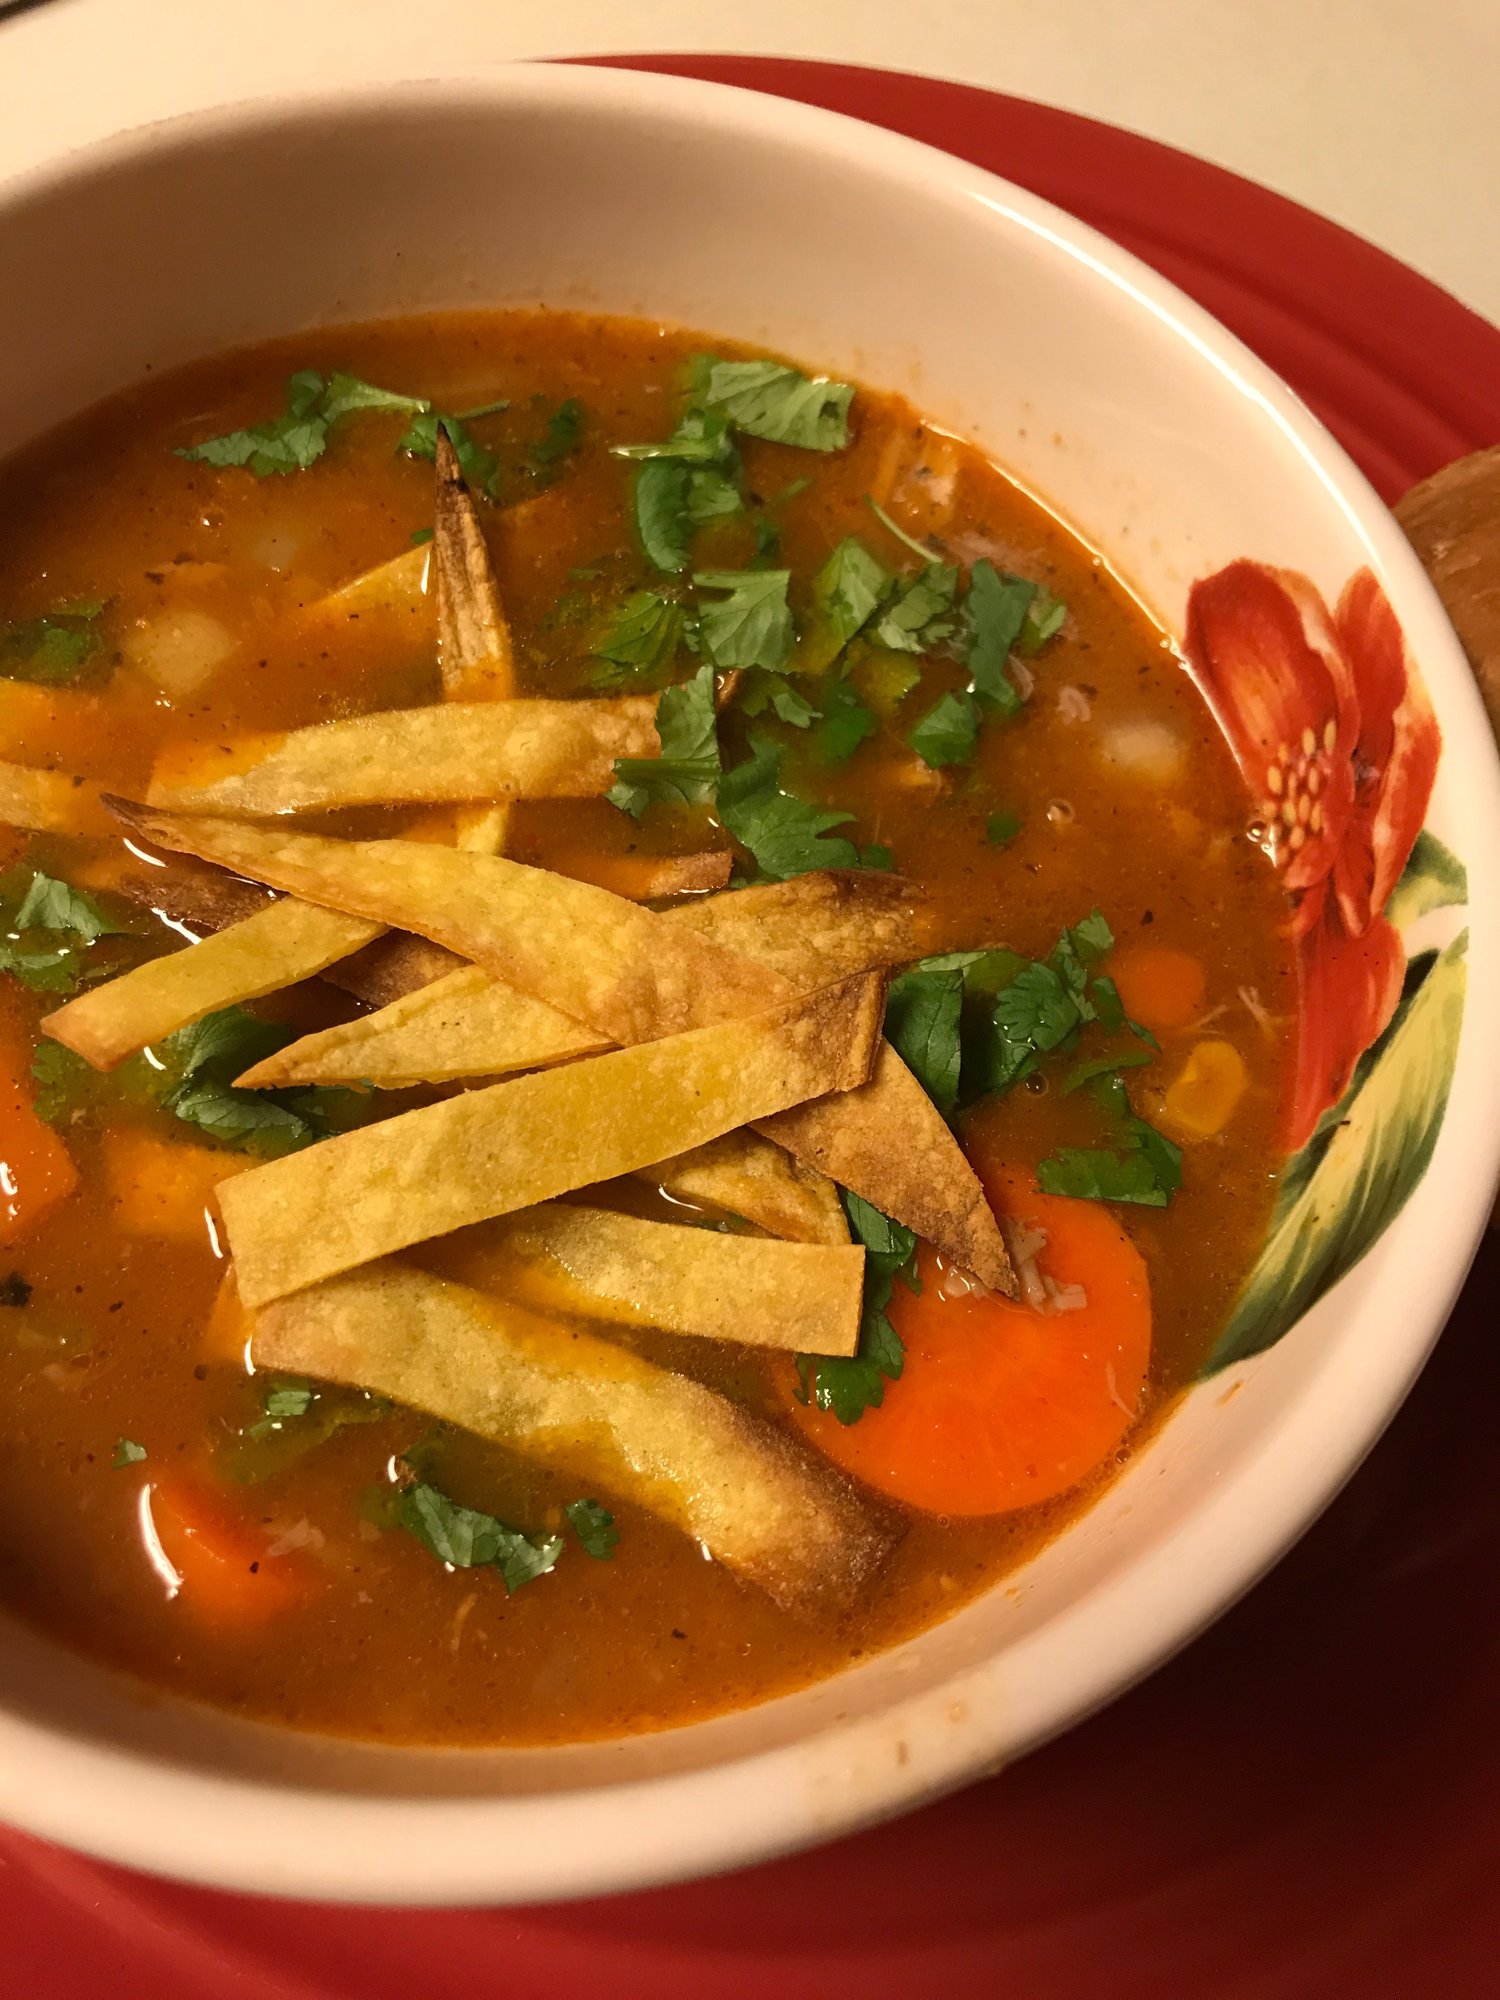  Spicy Chicken Tortilla Soup from Martha and Marley Spoon 